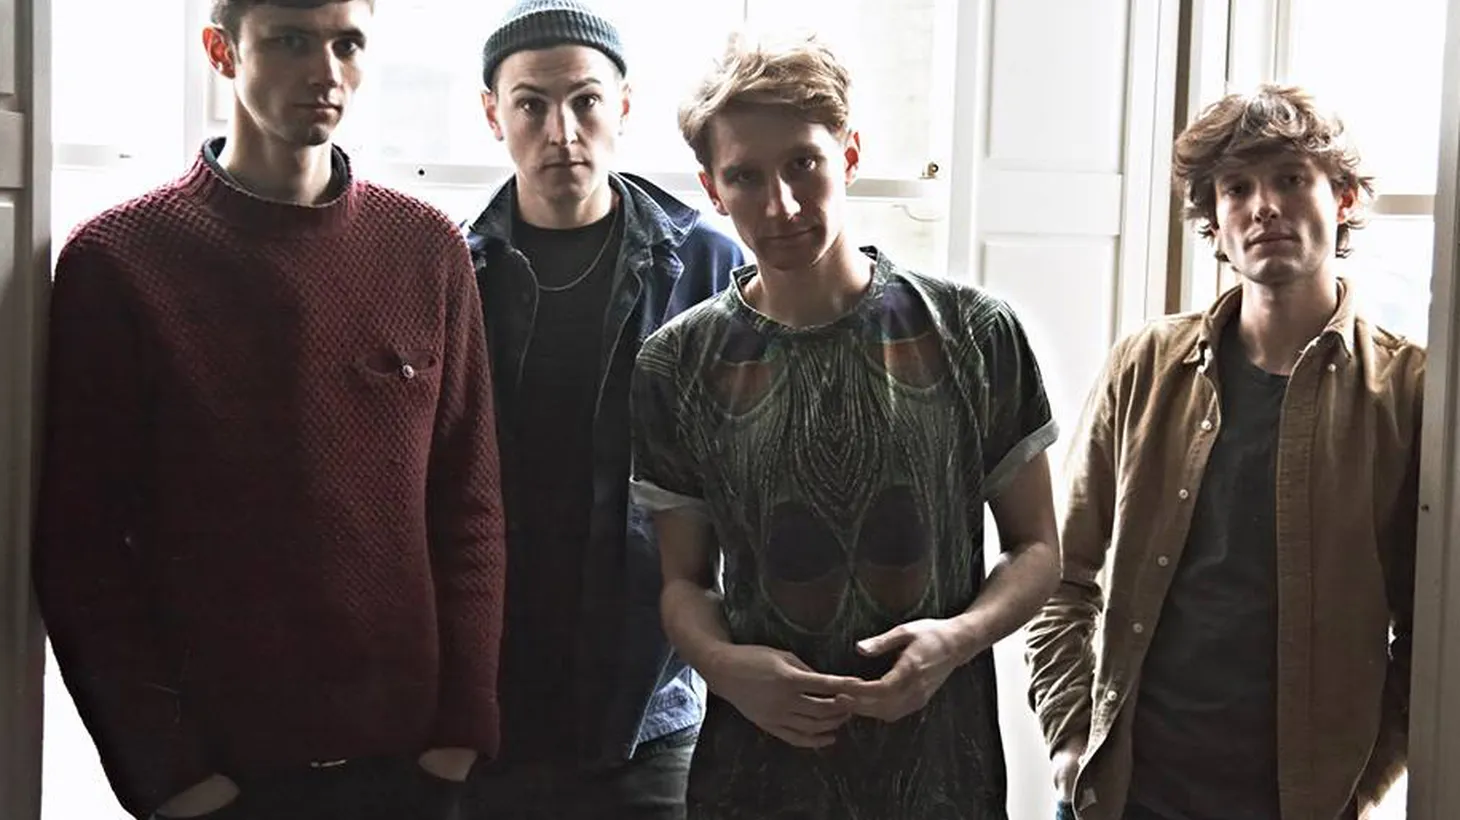 UK band Glass Animals can attribute their swift rise thanks to the strength of their excellent debut Zaba. Their much-anticipated follow-up was informed by their life on the road.